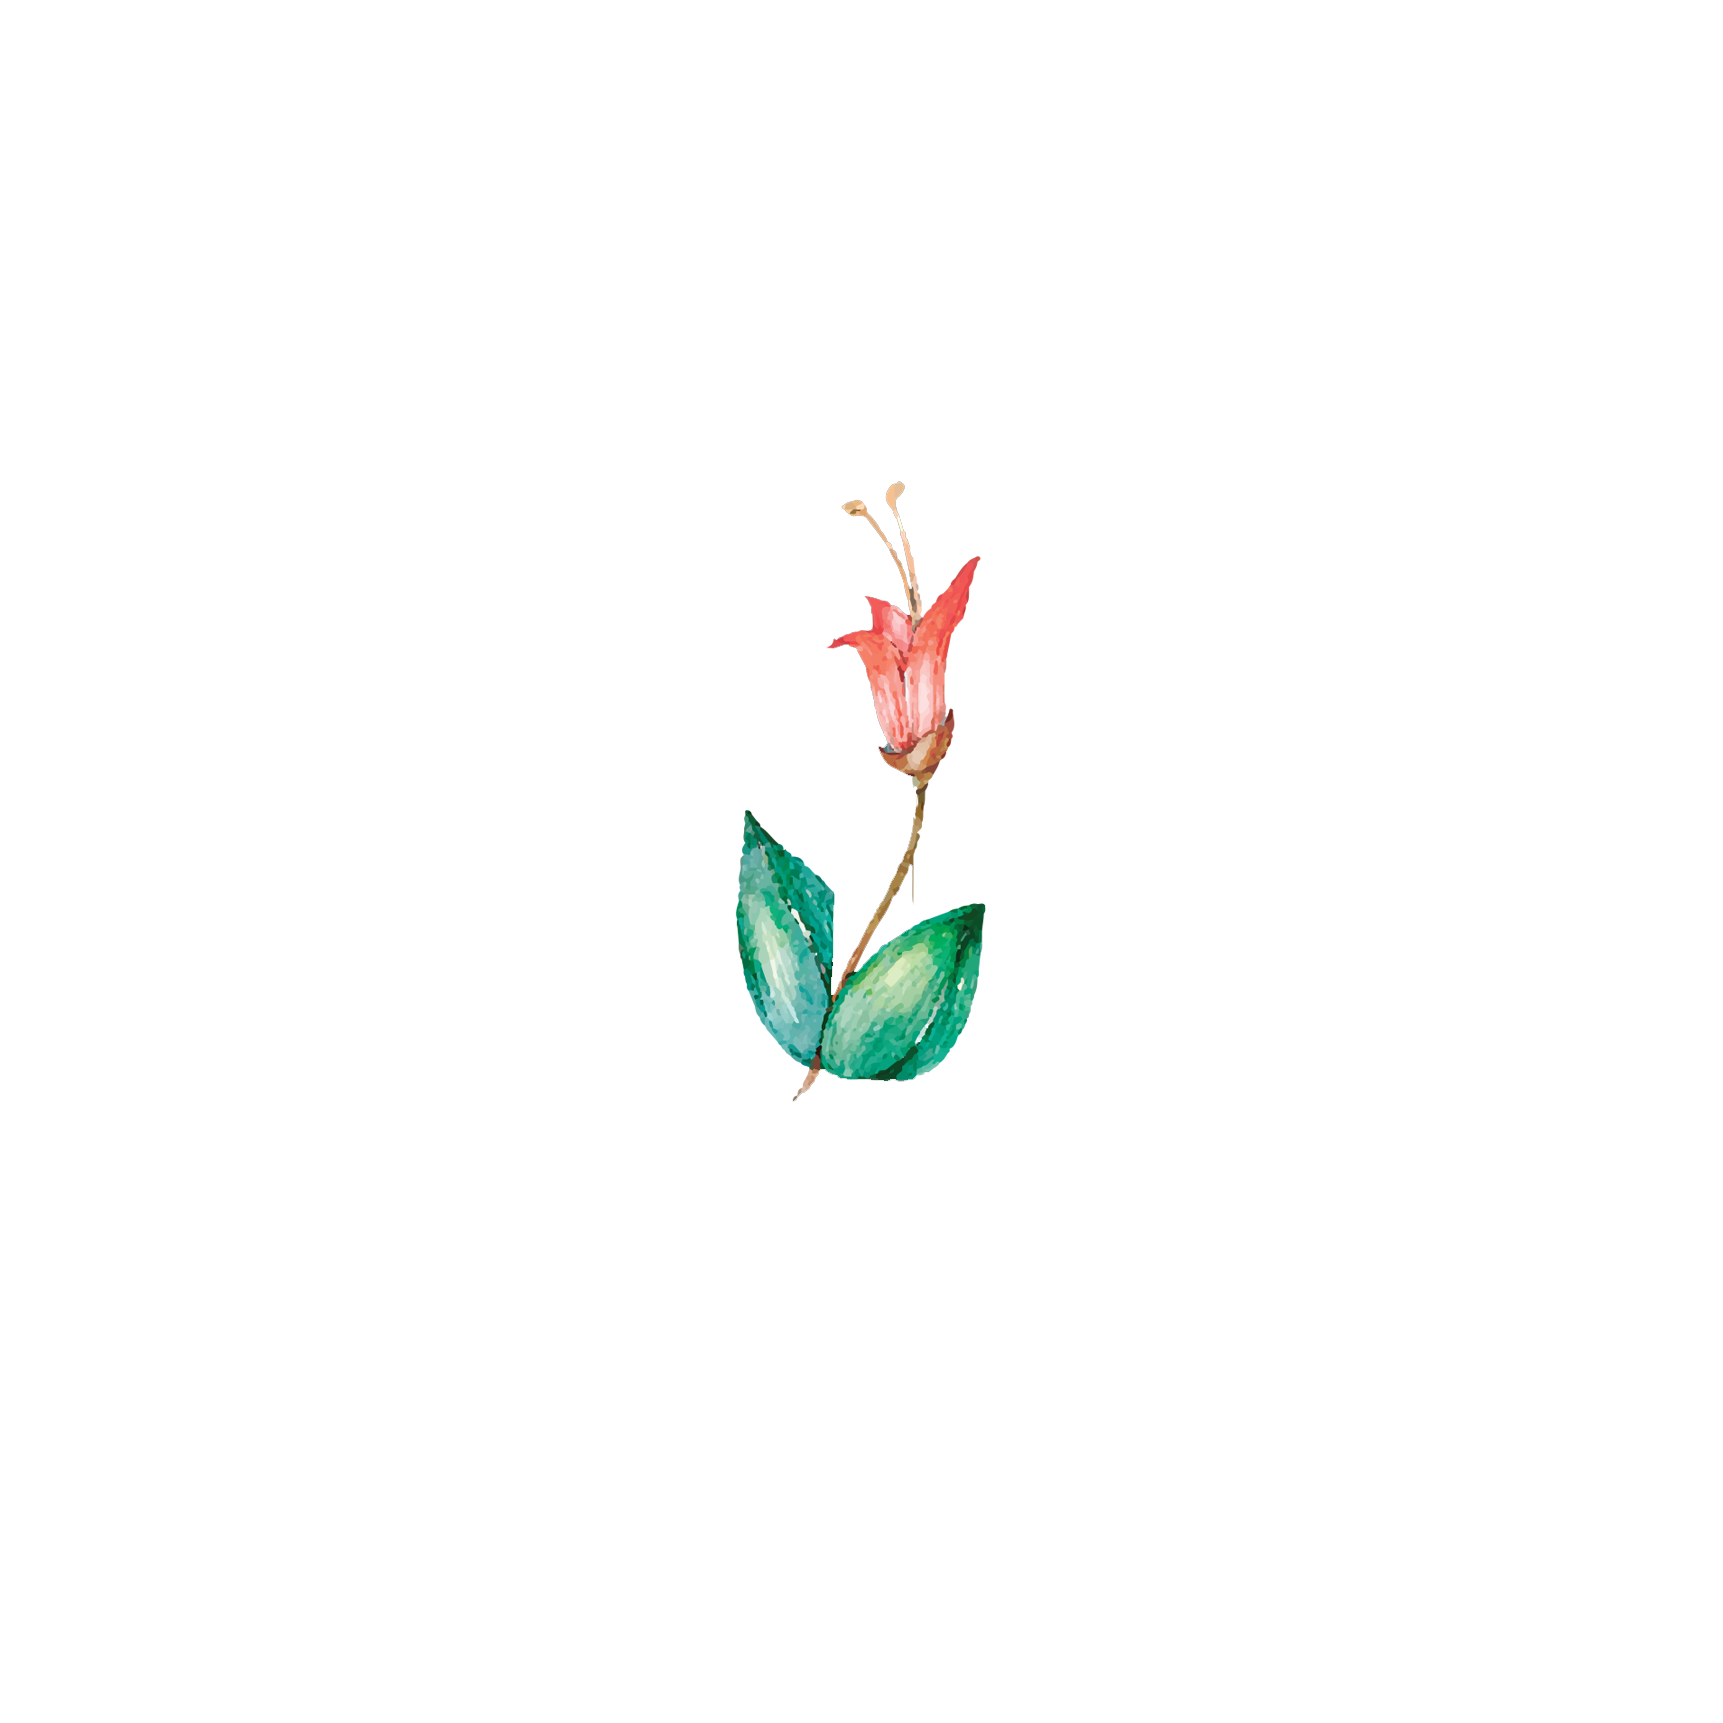 Click to read Day 1 - Sitting